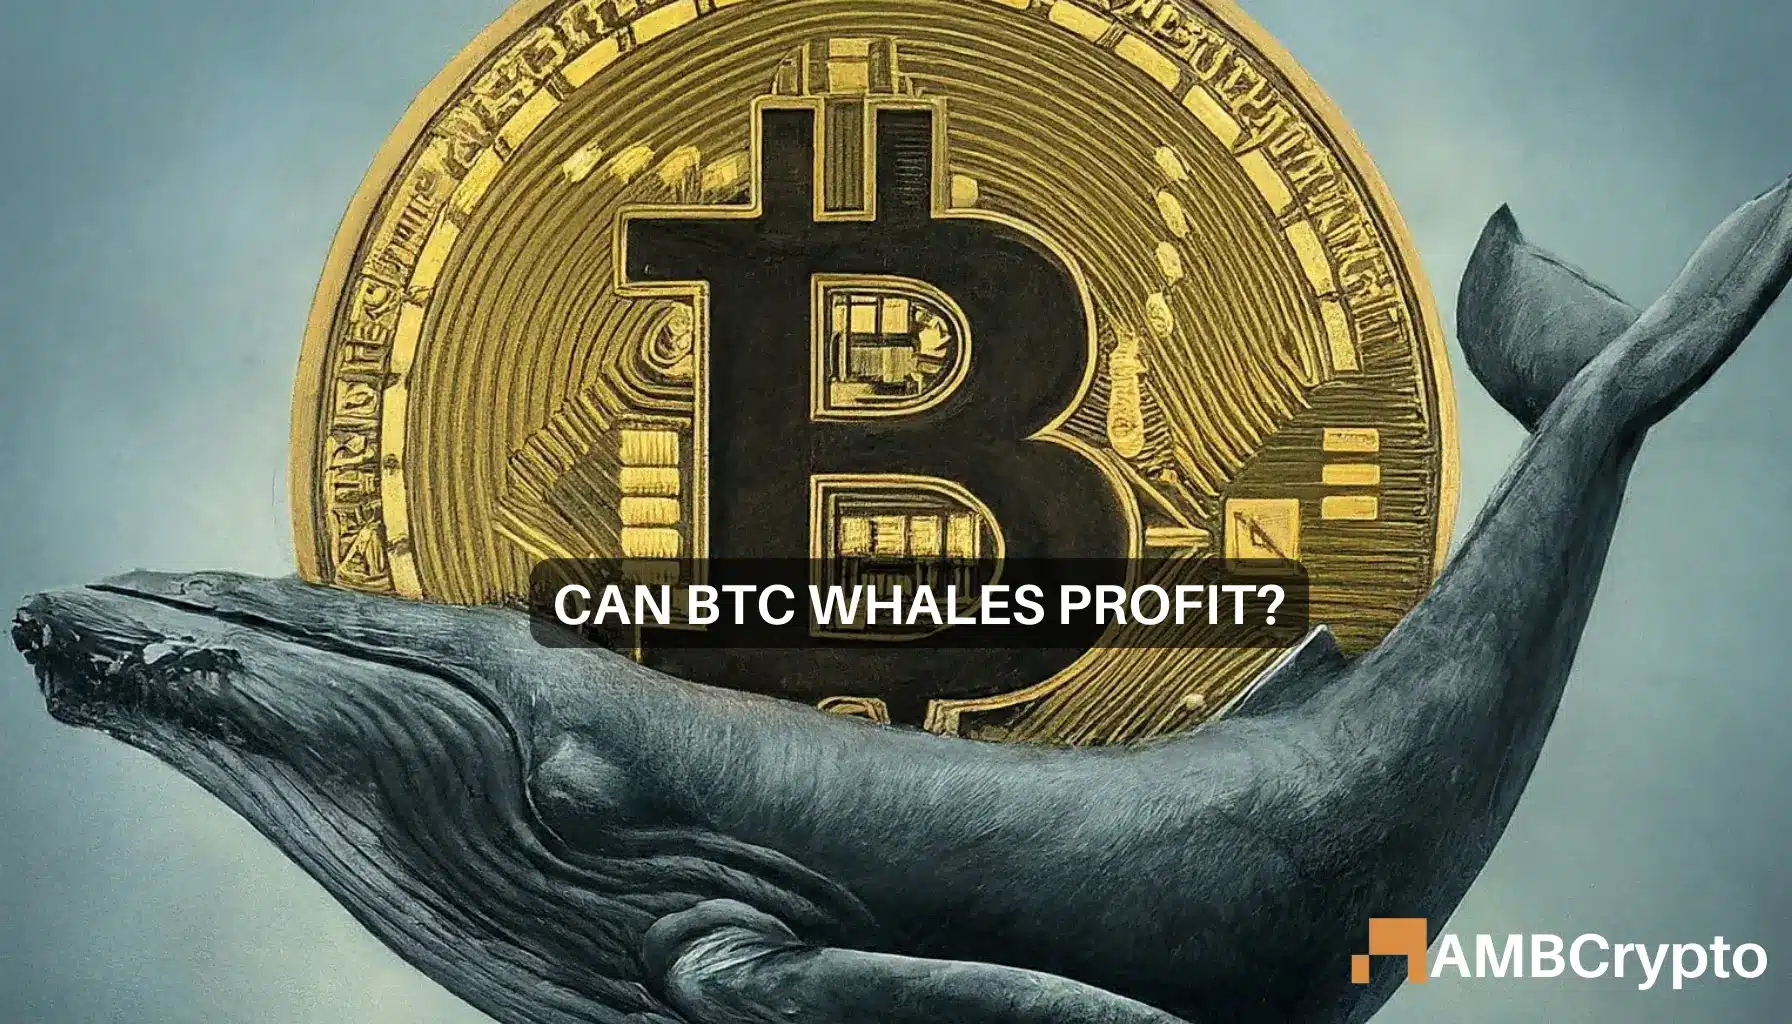 Bitcoin whales ‘buy the dip’ to leave retail investors…